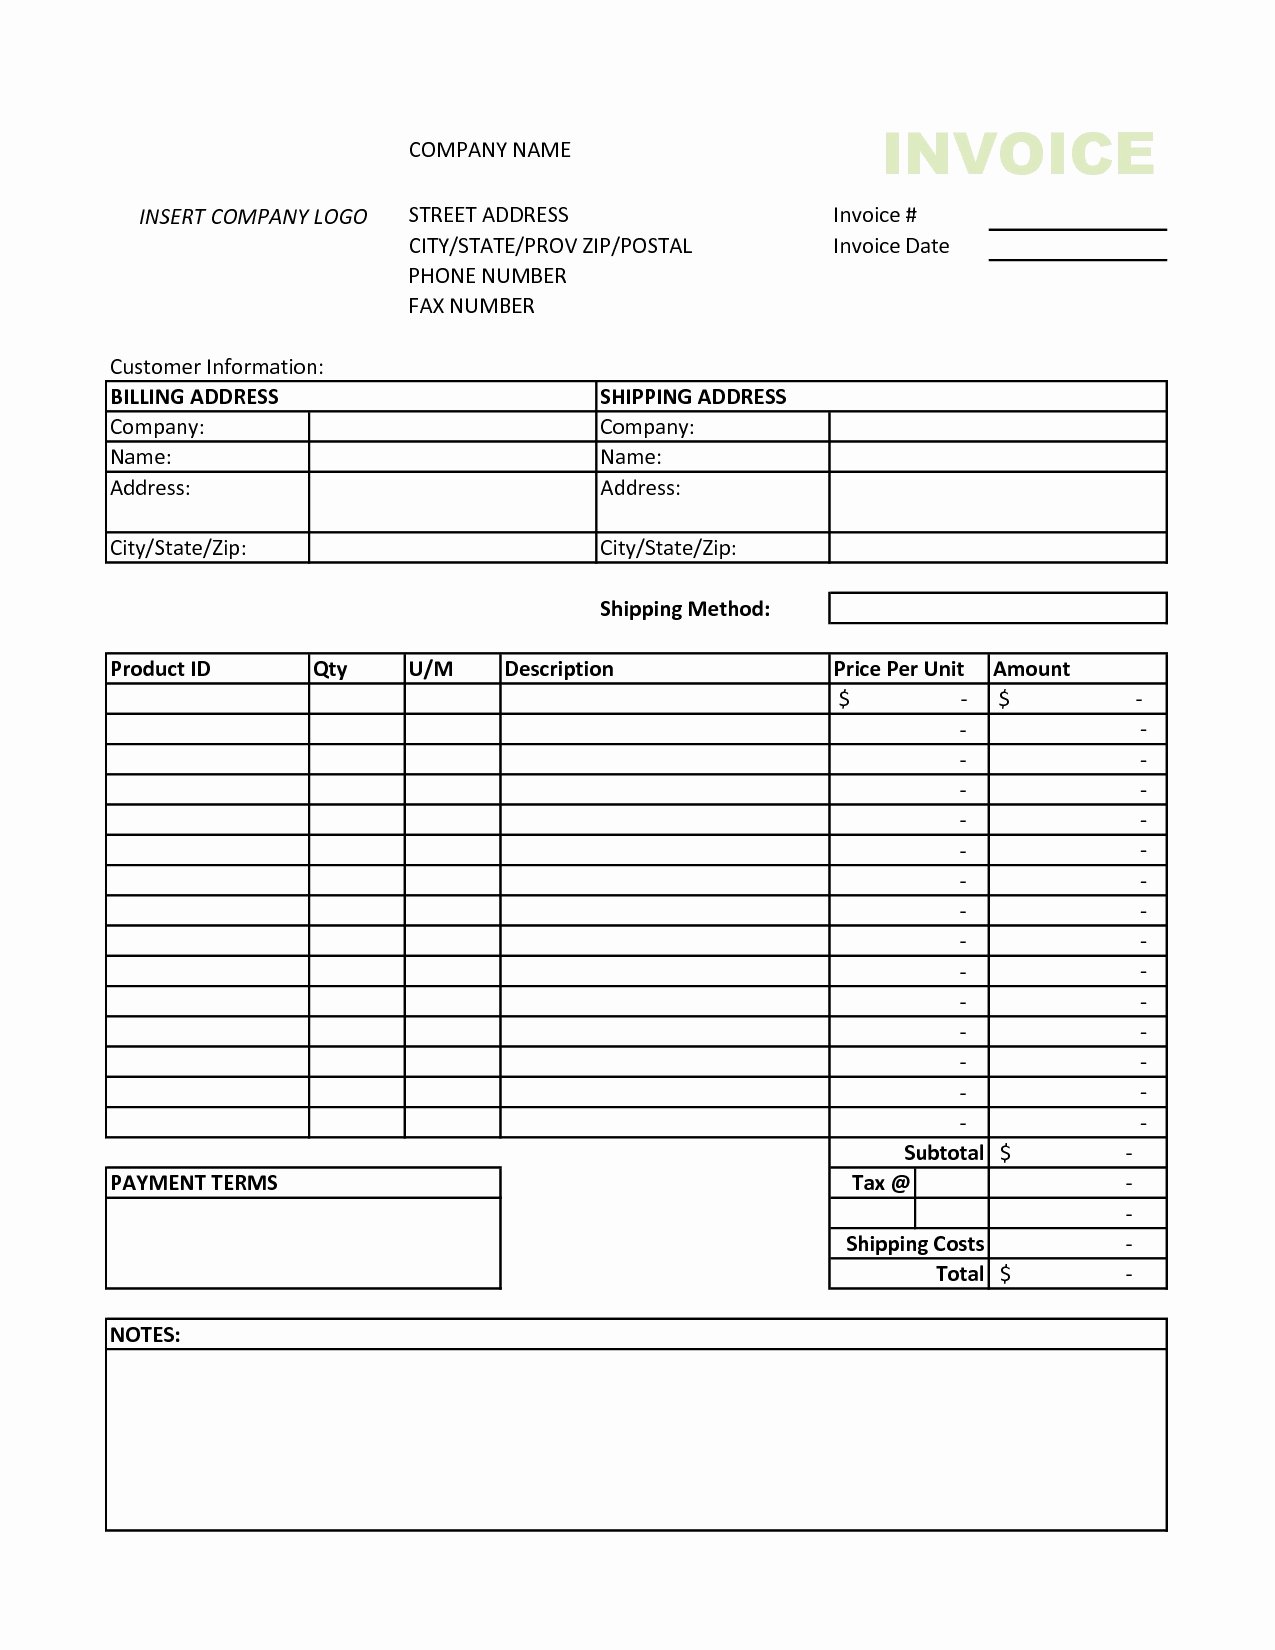 Sample Invoice Template Excel Beautiful Invoice Template Excel 2010